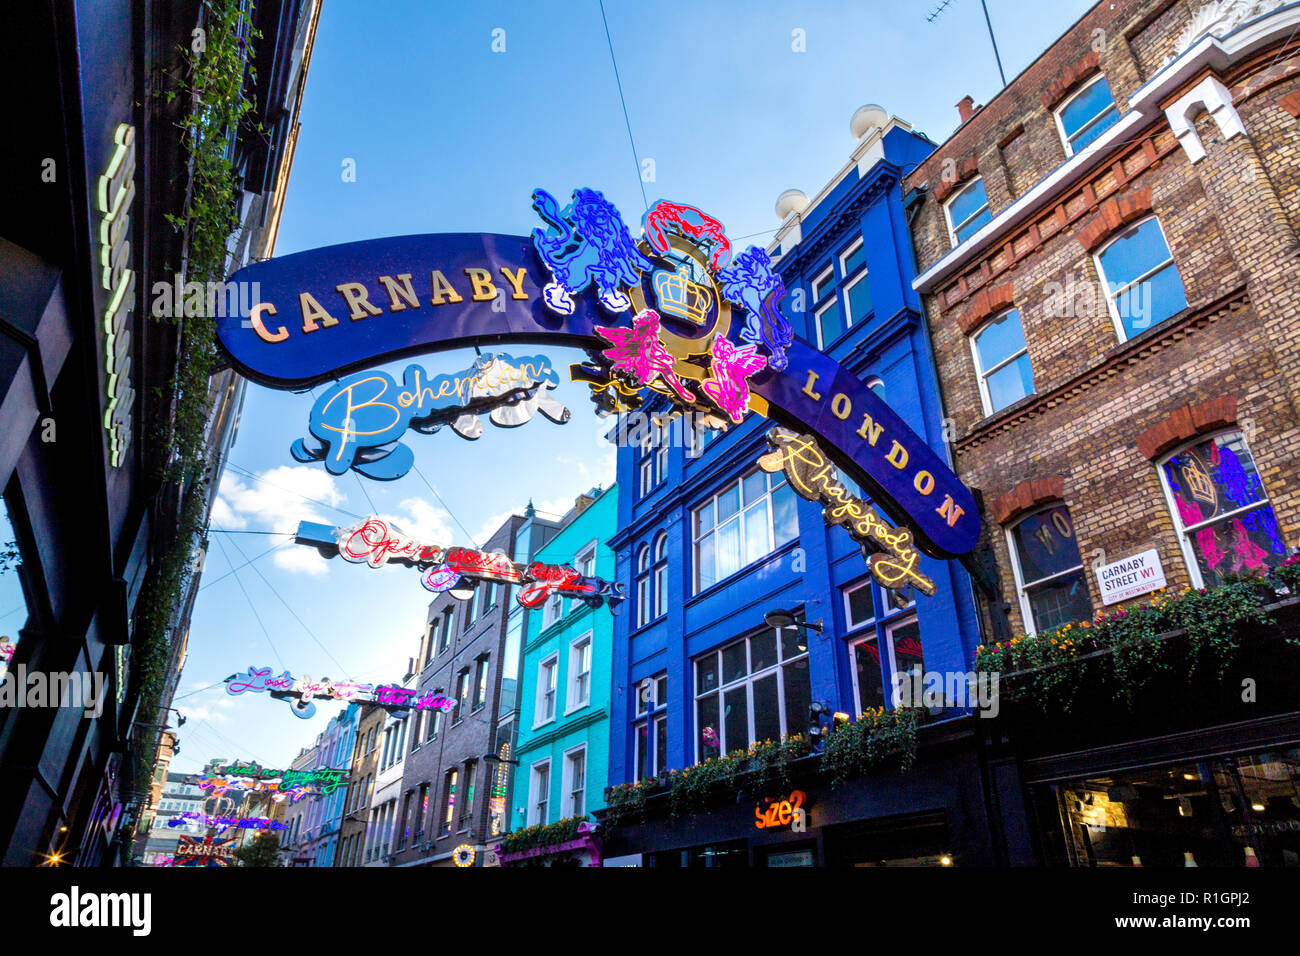 November 2018 - Carnaby Street Bohemian Rhapsody lights, in collaboration with 20th Century Fox's film release, London, UK Stock Photo